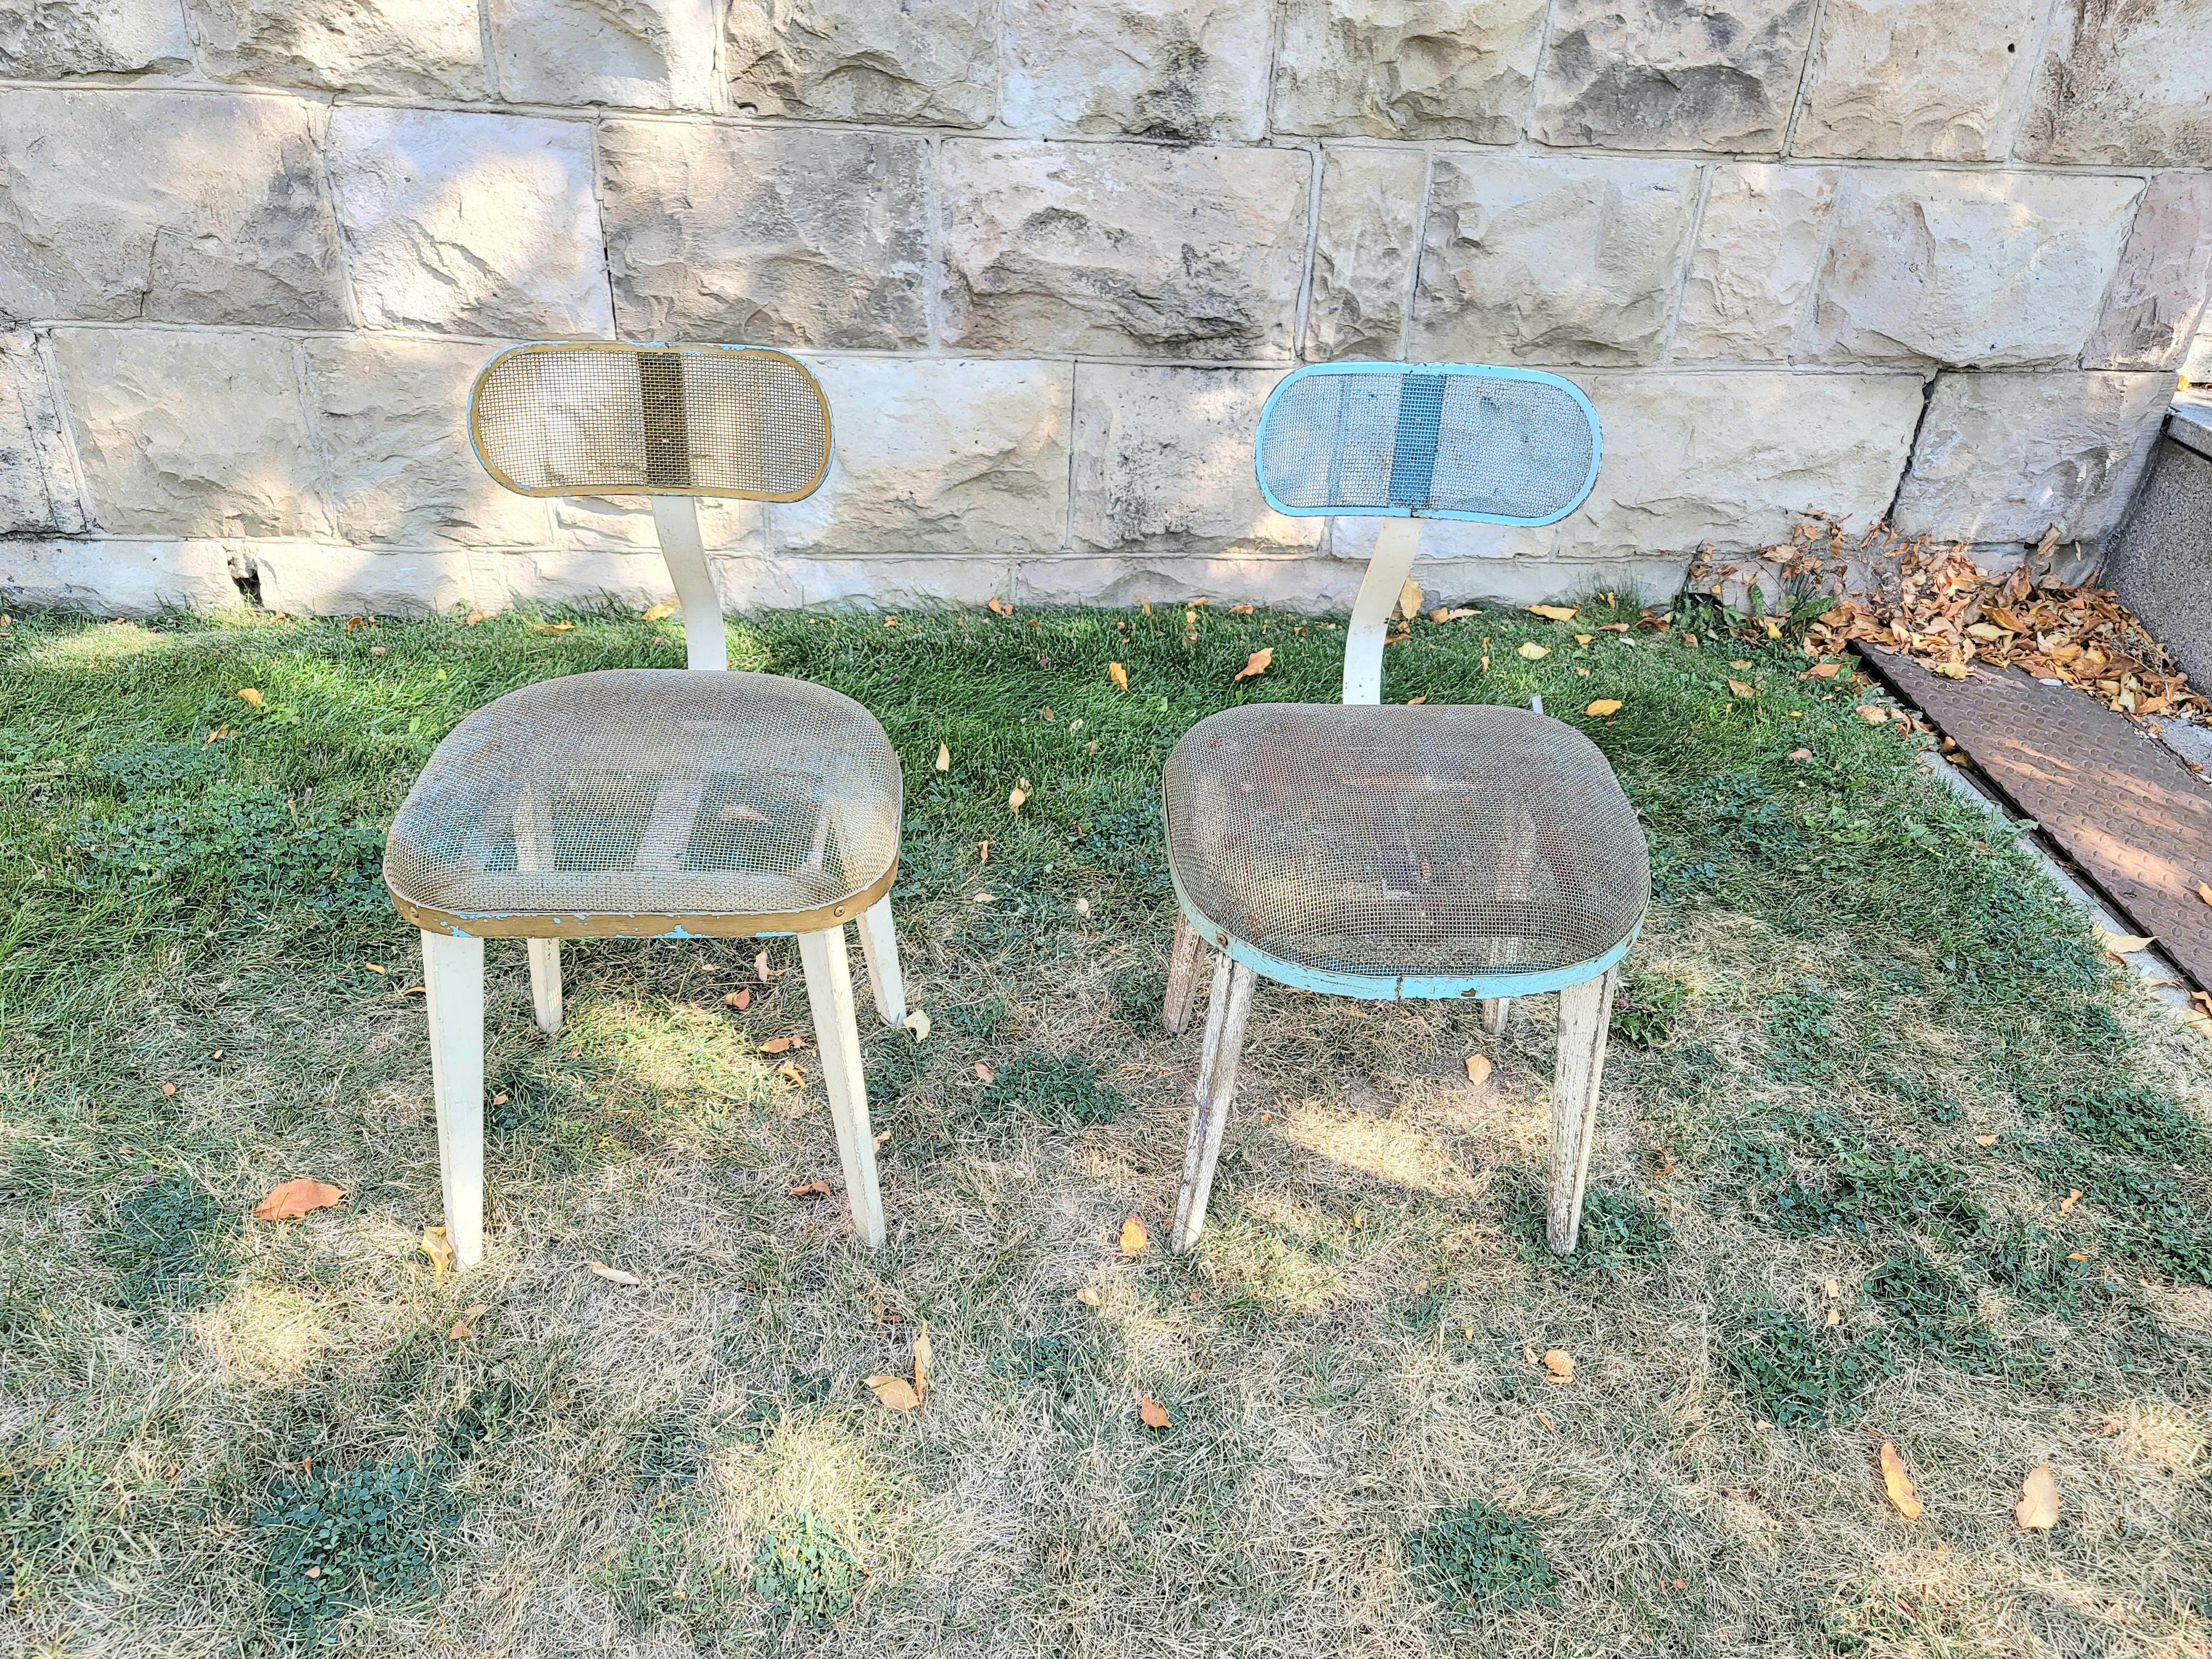 Wonderful and sculptural steel mesh and wood Industrial chairs manufactured by the Horton manufacturing company (1882-1953), circa 1940s very unique design with an adjustable back and a little Jean Prouvé influence in the leg! In original vintage